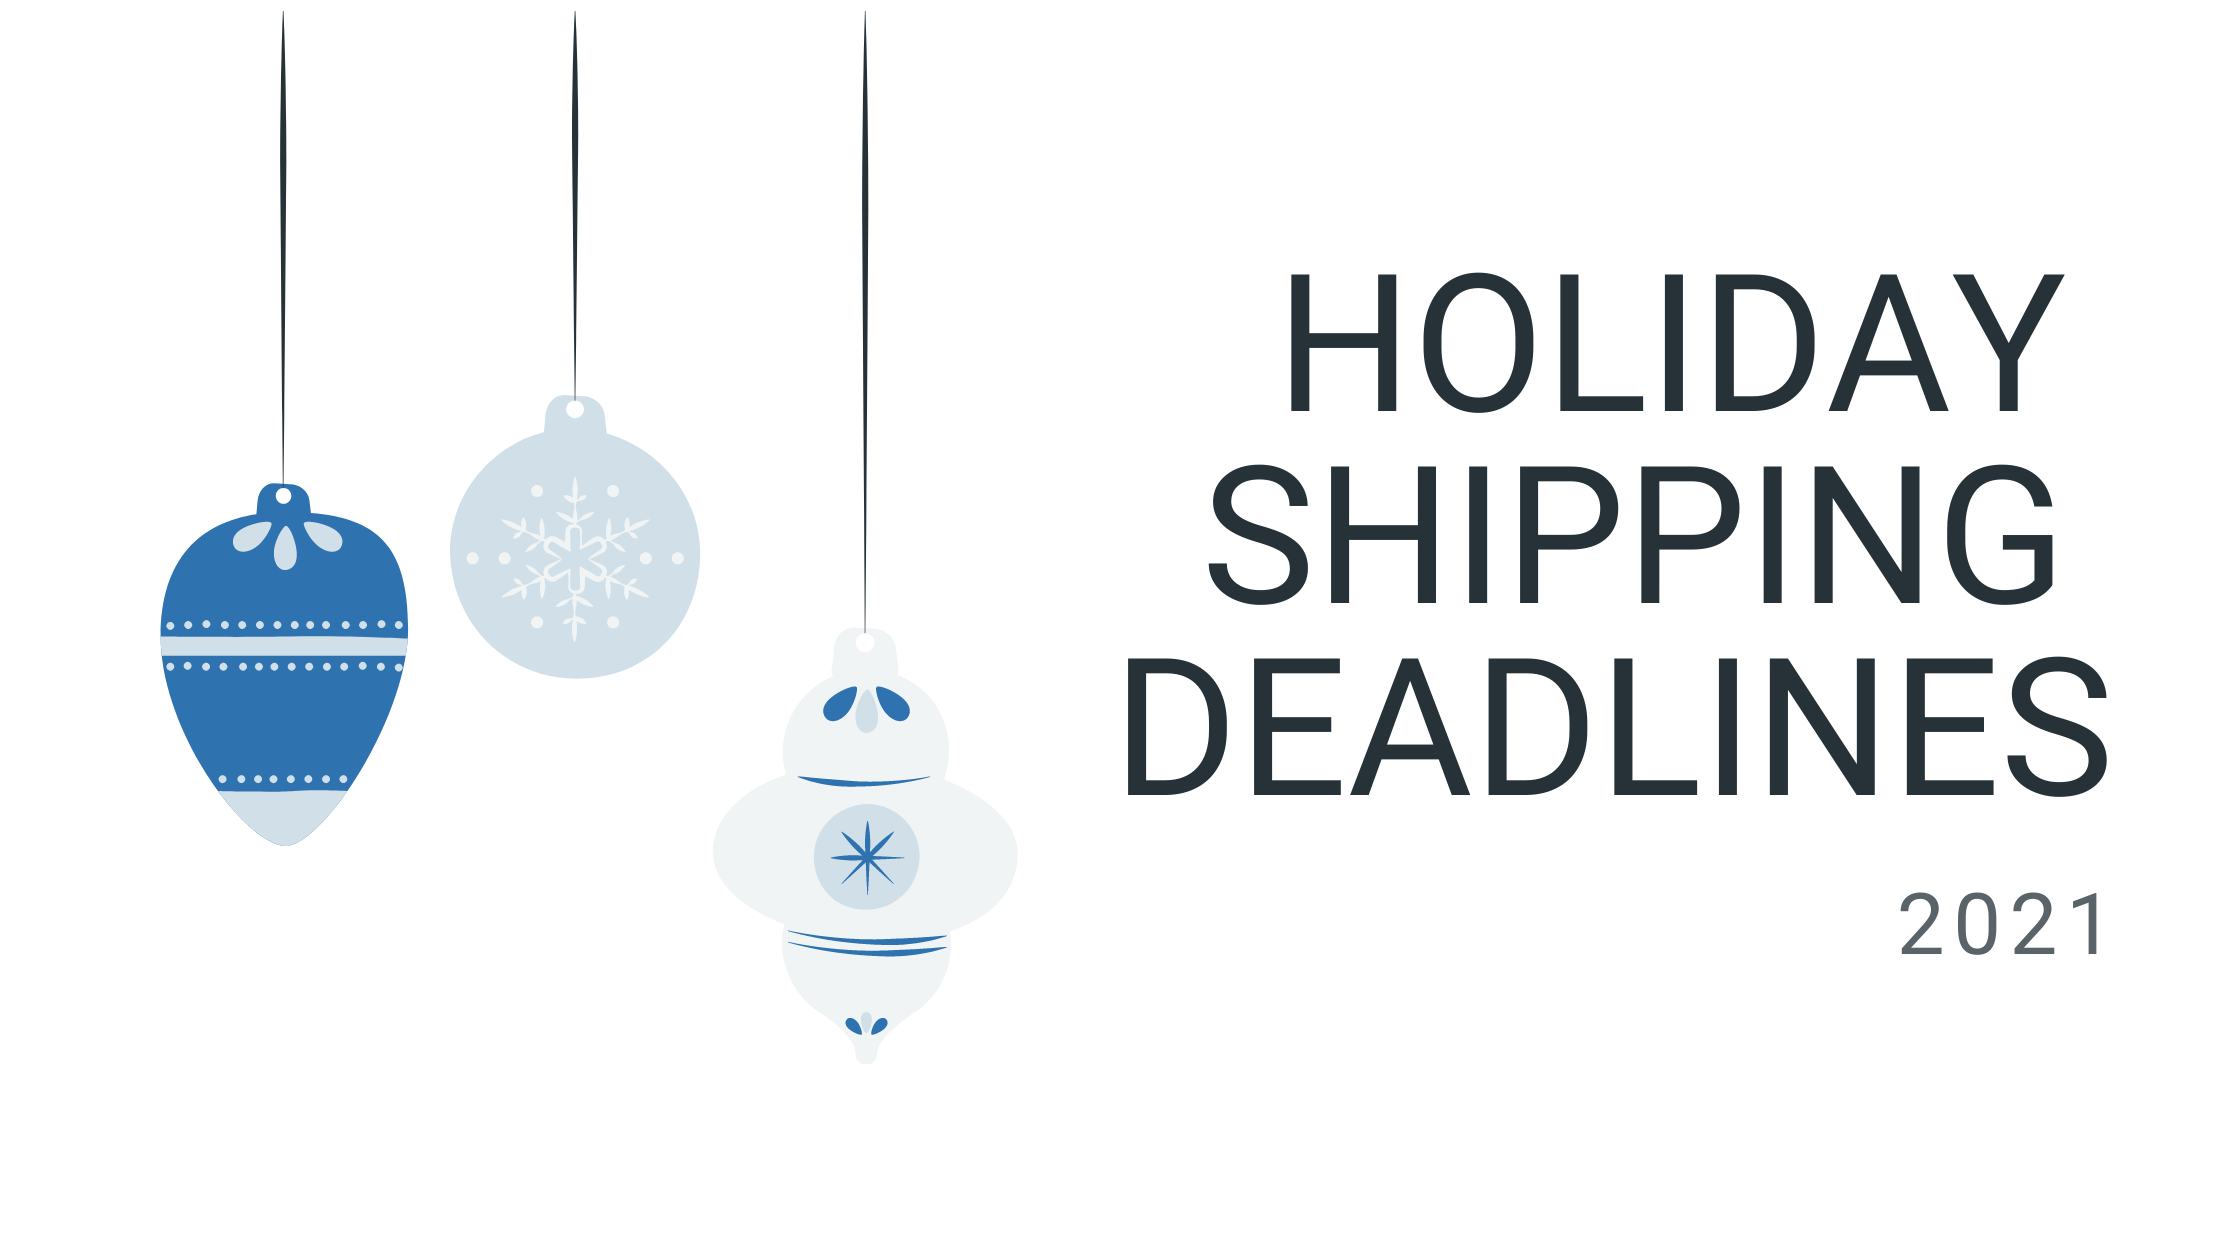 Holiday Shipping Deadlines in the U.S. (2021)